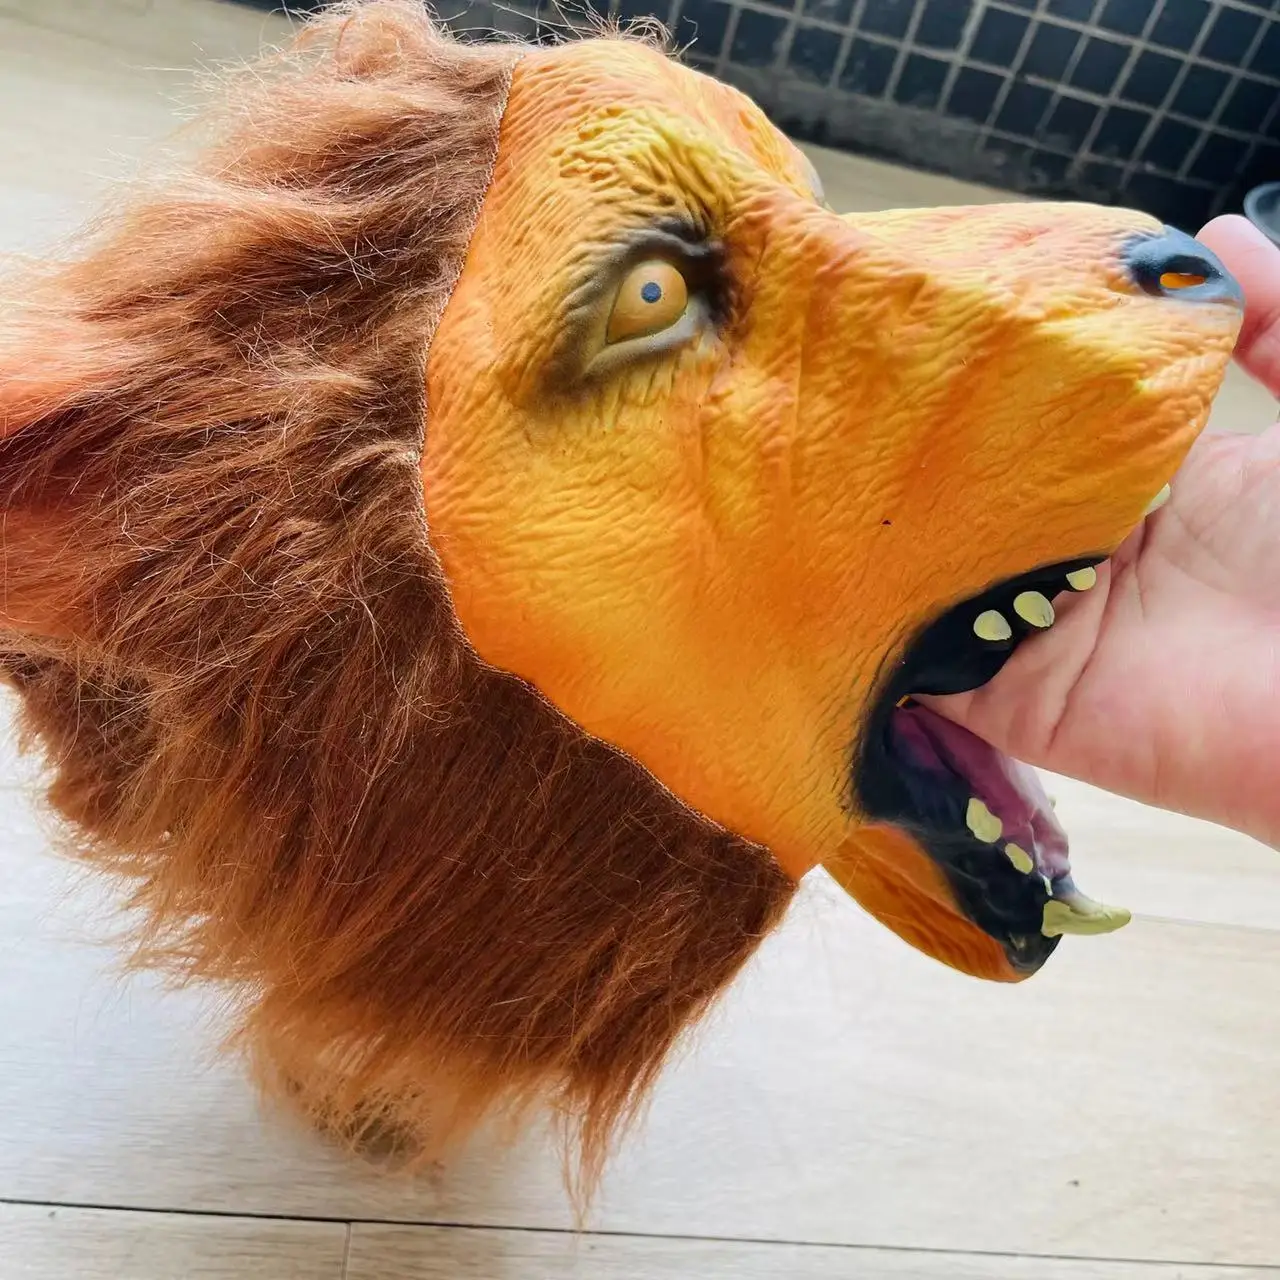 Old Lion mask Cosplay Mask Animal Cos Accessory Kid Halloween Holiday Gift Carnival Party Funny Mask Cospaly Heargear